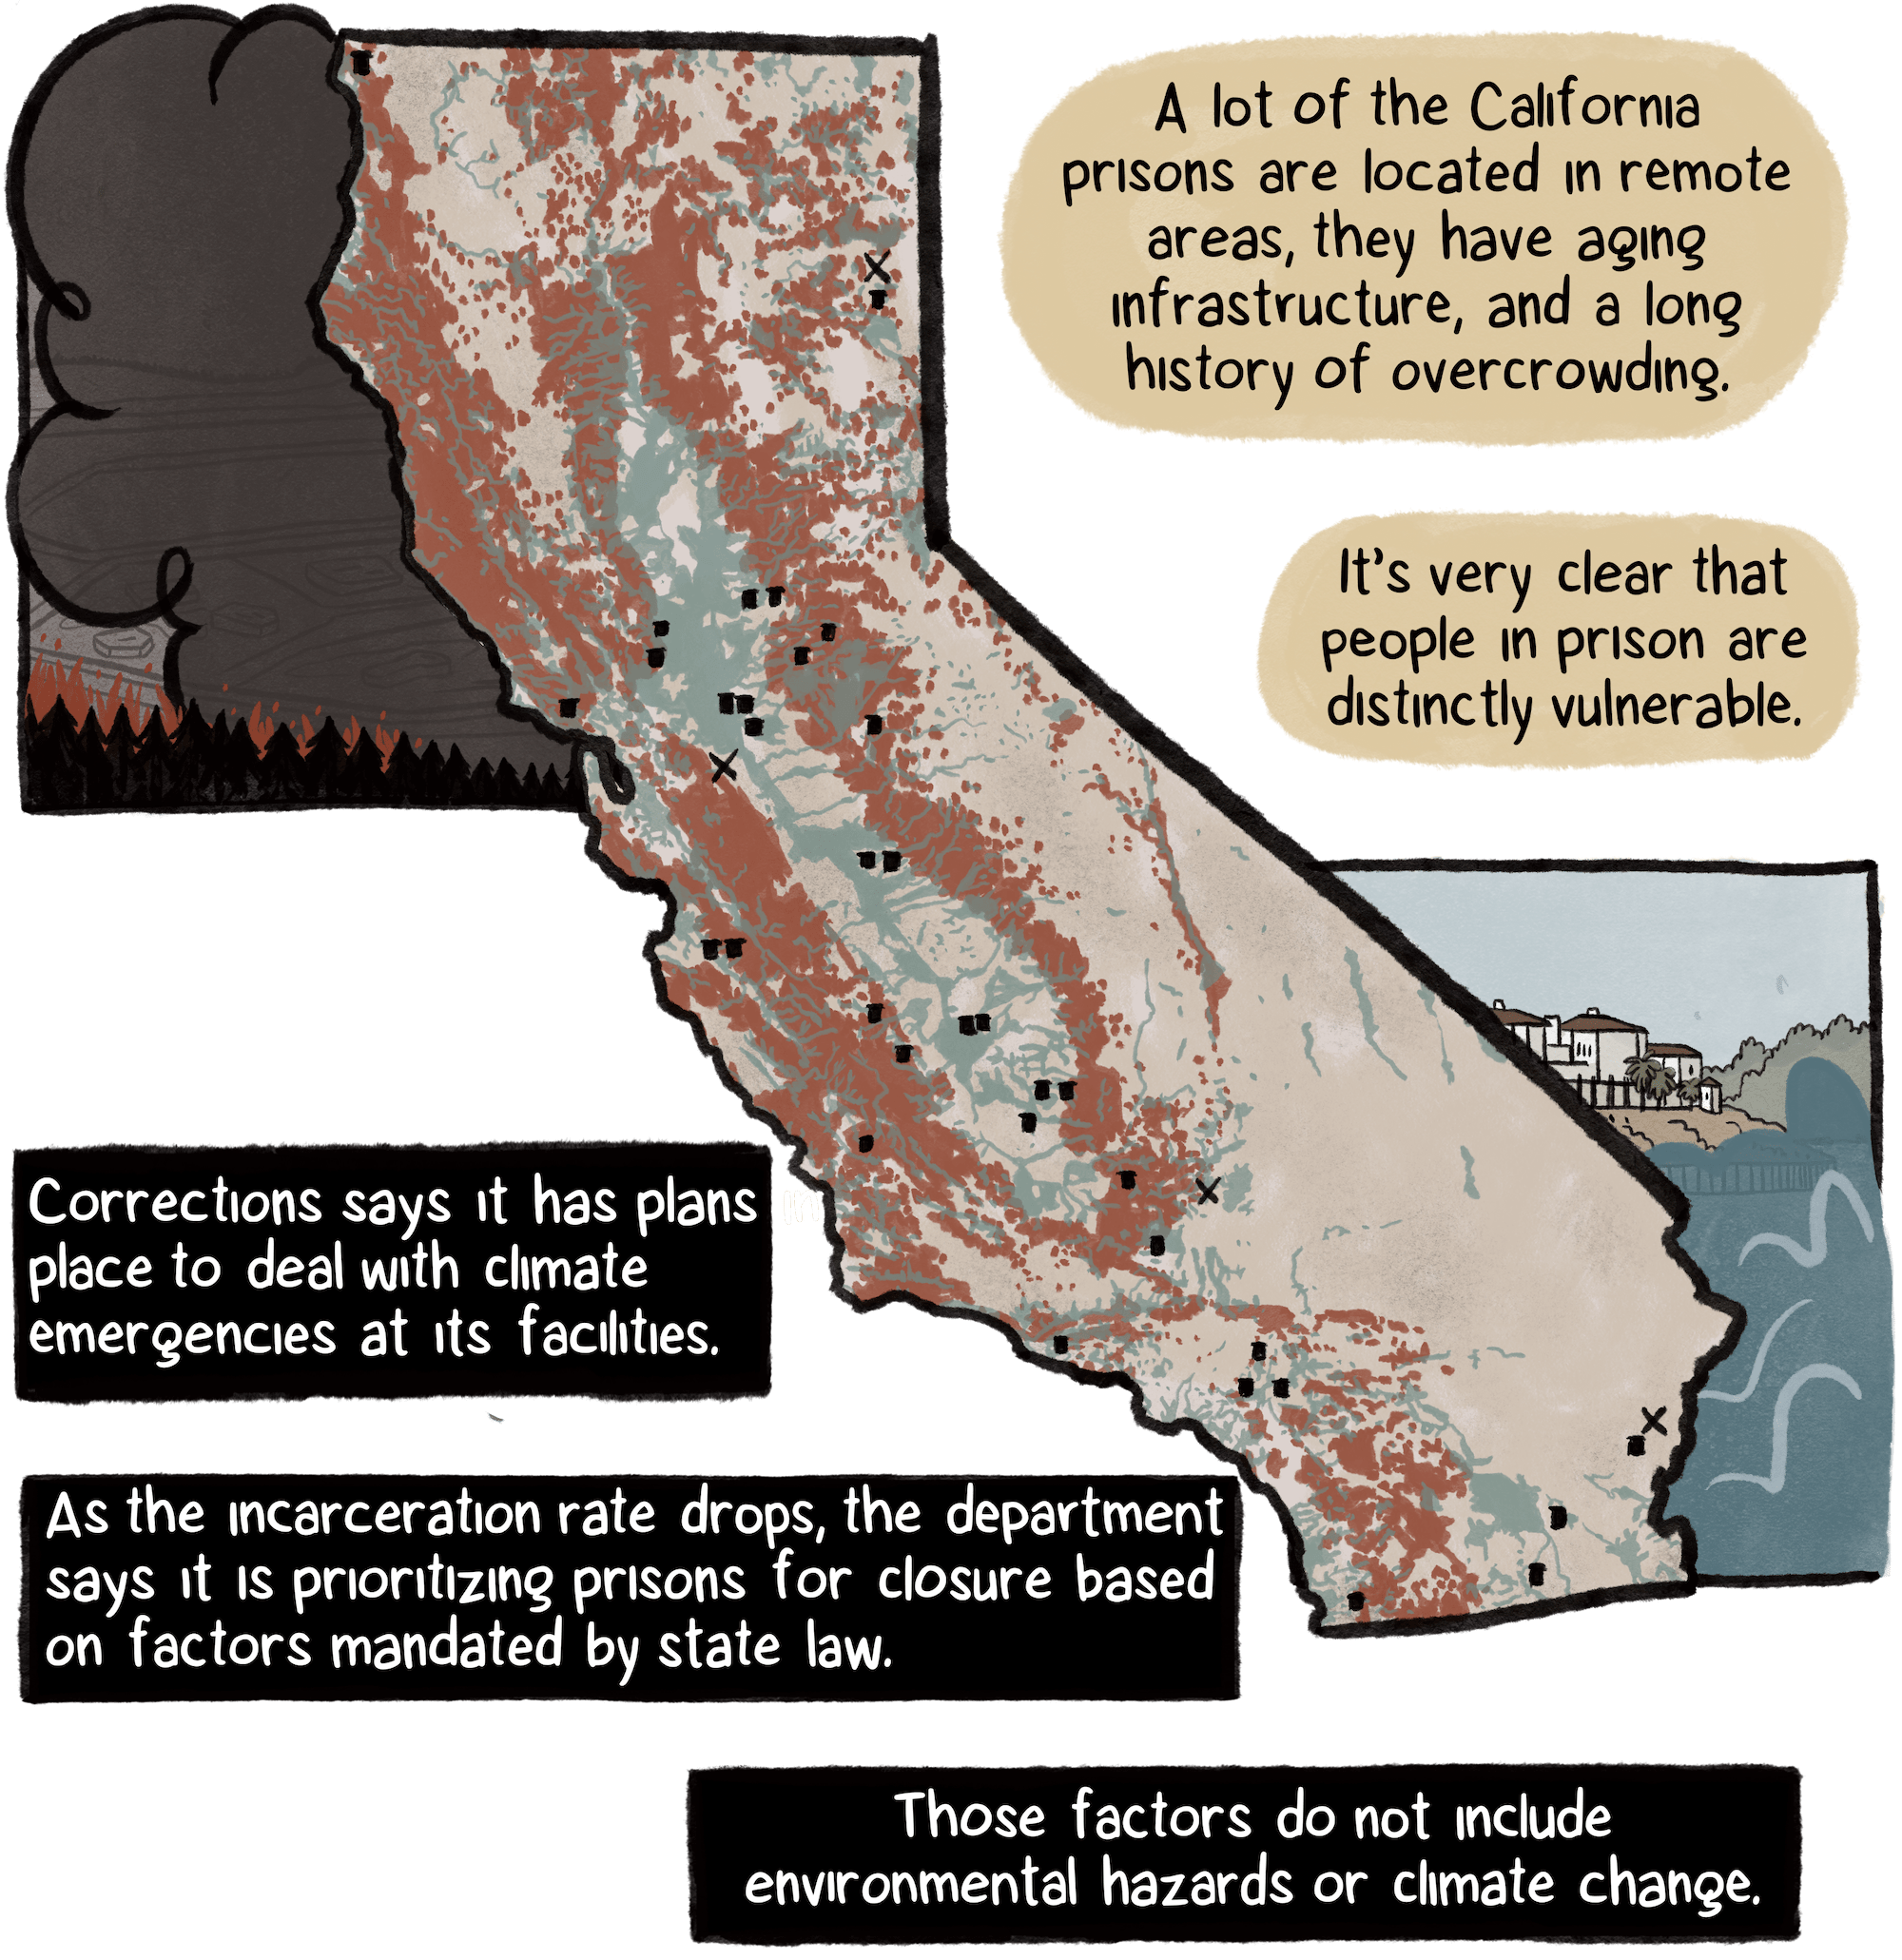 “A lot of the California prisons are located in remote areas, they have aging infrastructure, and a long history of overcrowding,” Harris says. A map of California shows black dots representing prisons throughout the state. Smoke and floodwaters border the map. The Department of Corrections says it has plans to deal with climate emergencies. And prison closures are based on mandated factors. However, those factors do not include environmental hazards or climate change.